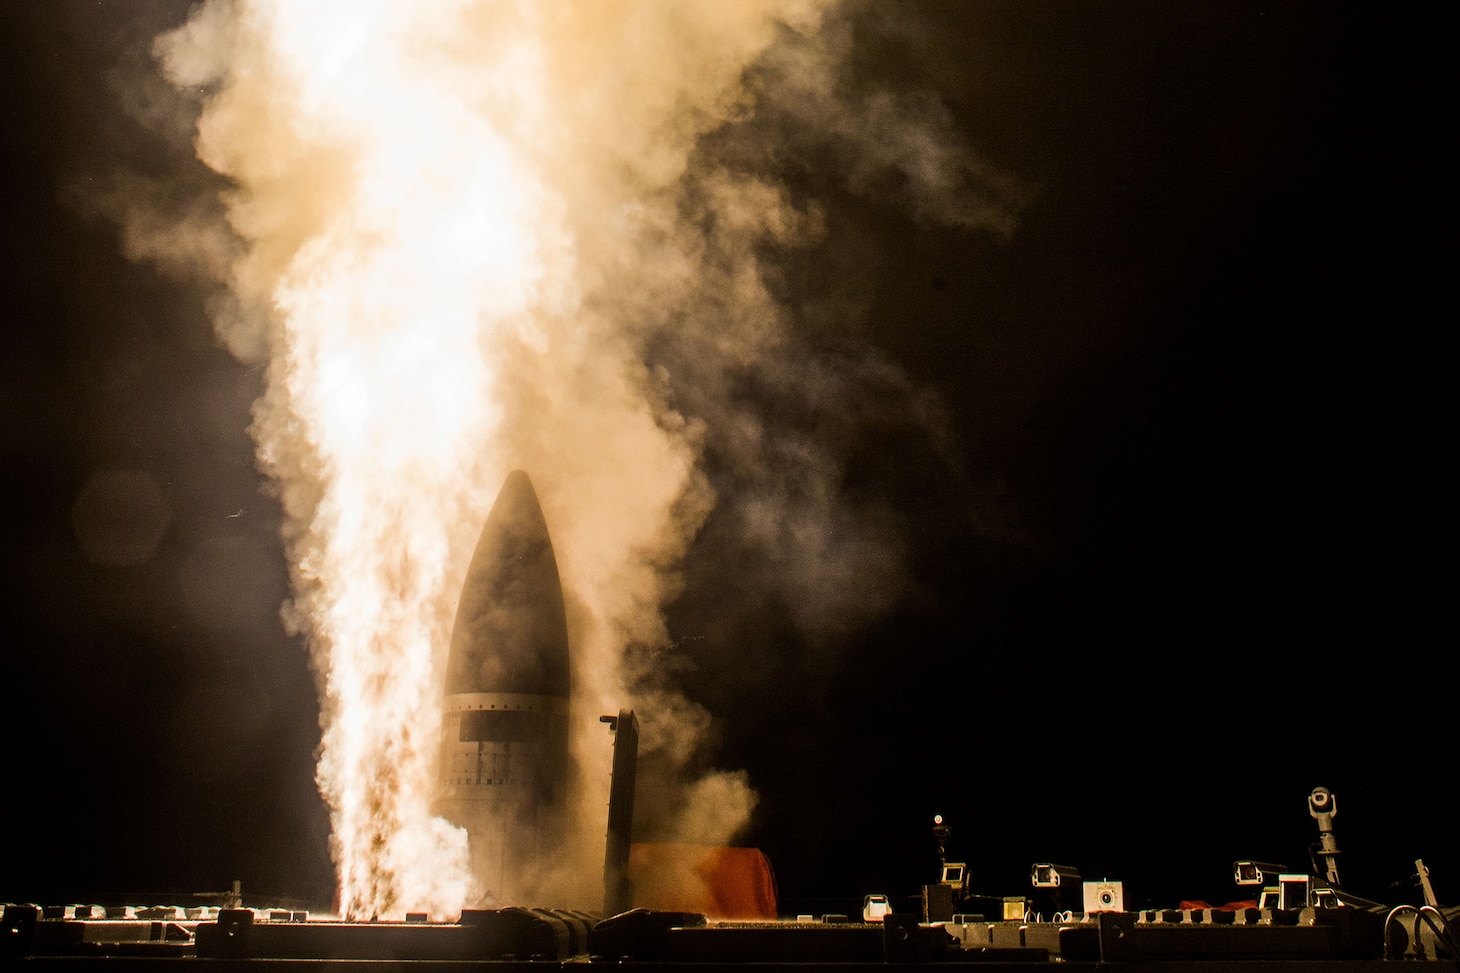 A Standard Missile-3 (SM-3) Block IIA is launched from the guided-missile destroyer USS John Paul Jones (DDG 53) during a flight test off Hawaii resulting in the first intercept of a ballistic missile target by the SM-3IIA, which is being developed cooperatively by the U.S. and Japan, Feb. 3, 2017. This test also marks the first time an SM-3IIA was launched from an Aegis ship and the first intercept engagement using the Aegis Baseline 9.C2 (BMD 5.1) weapon system.